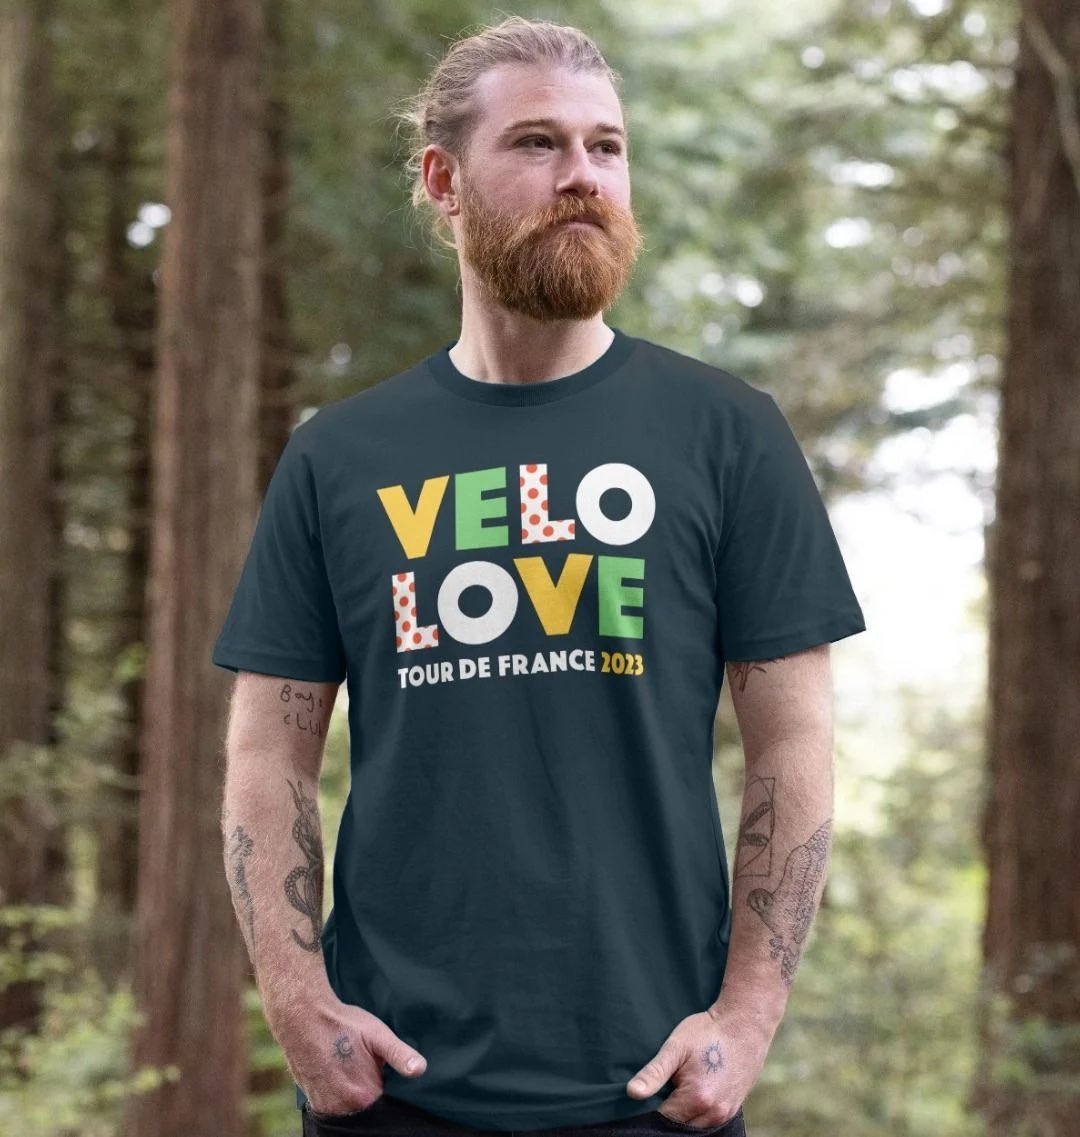 Stand out from the peloton with our unique 2023 Tour de France T-shirt. Only £19 & FREE DELIVERY now on. Visit: bennymeadows.teemill.com/product/velo-l…

#TourdeFrance #tourdefrance2023 #tour 
#lovevelo #bikelife  
#peloton #britishcycling #cycling #cubers #BikeRide #Ashes2023 #Saturday #cyclist